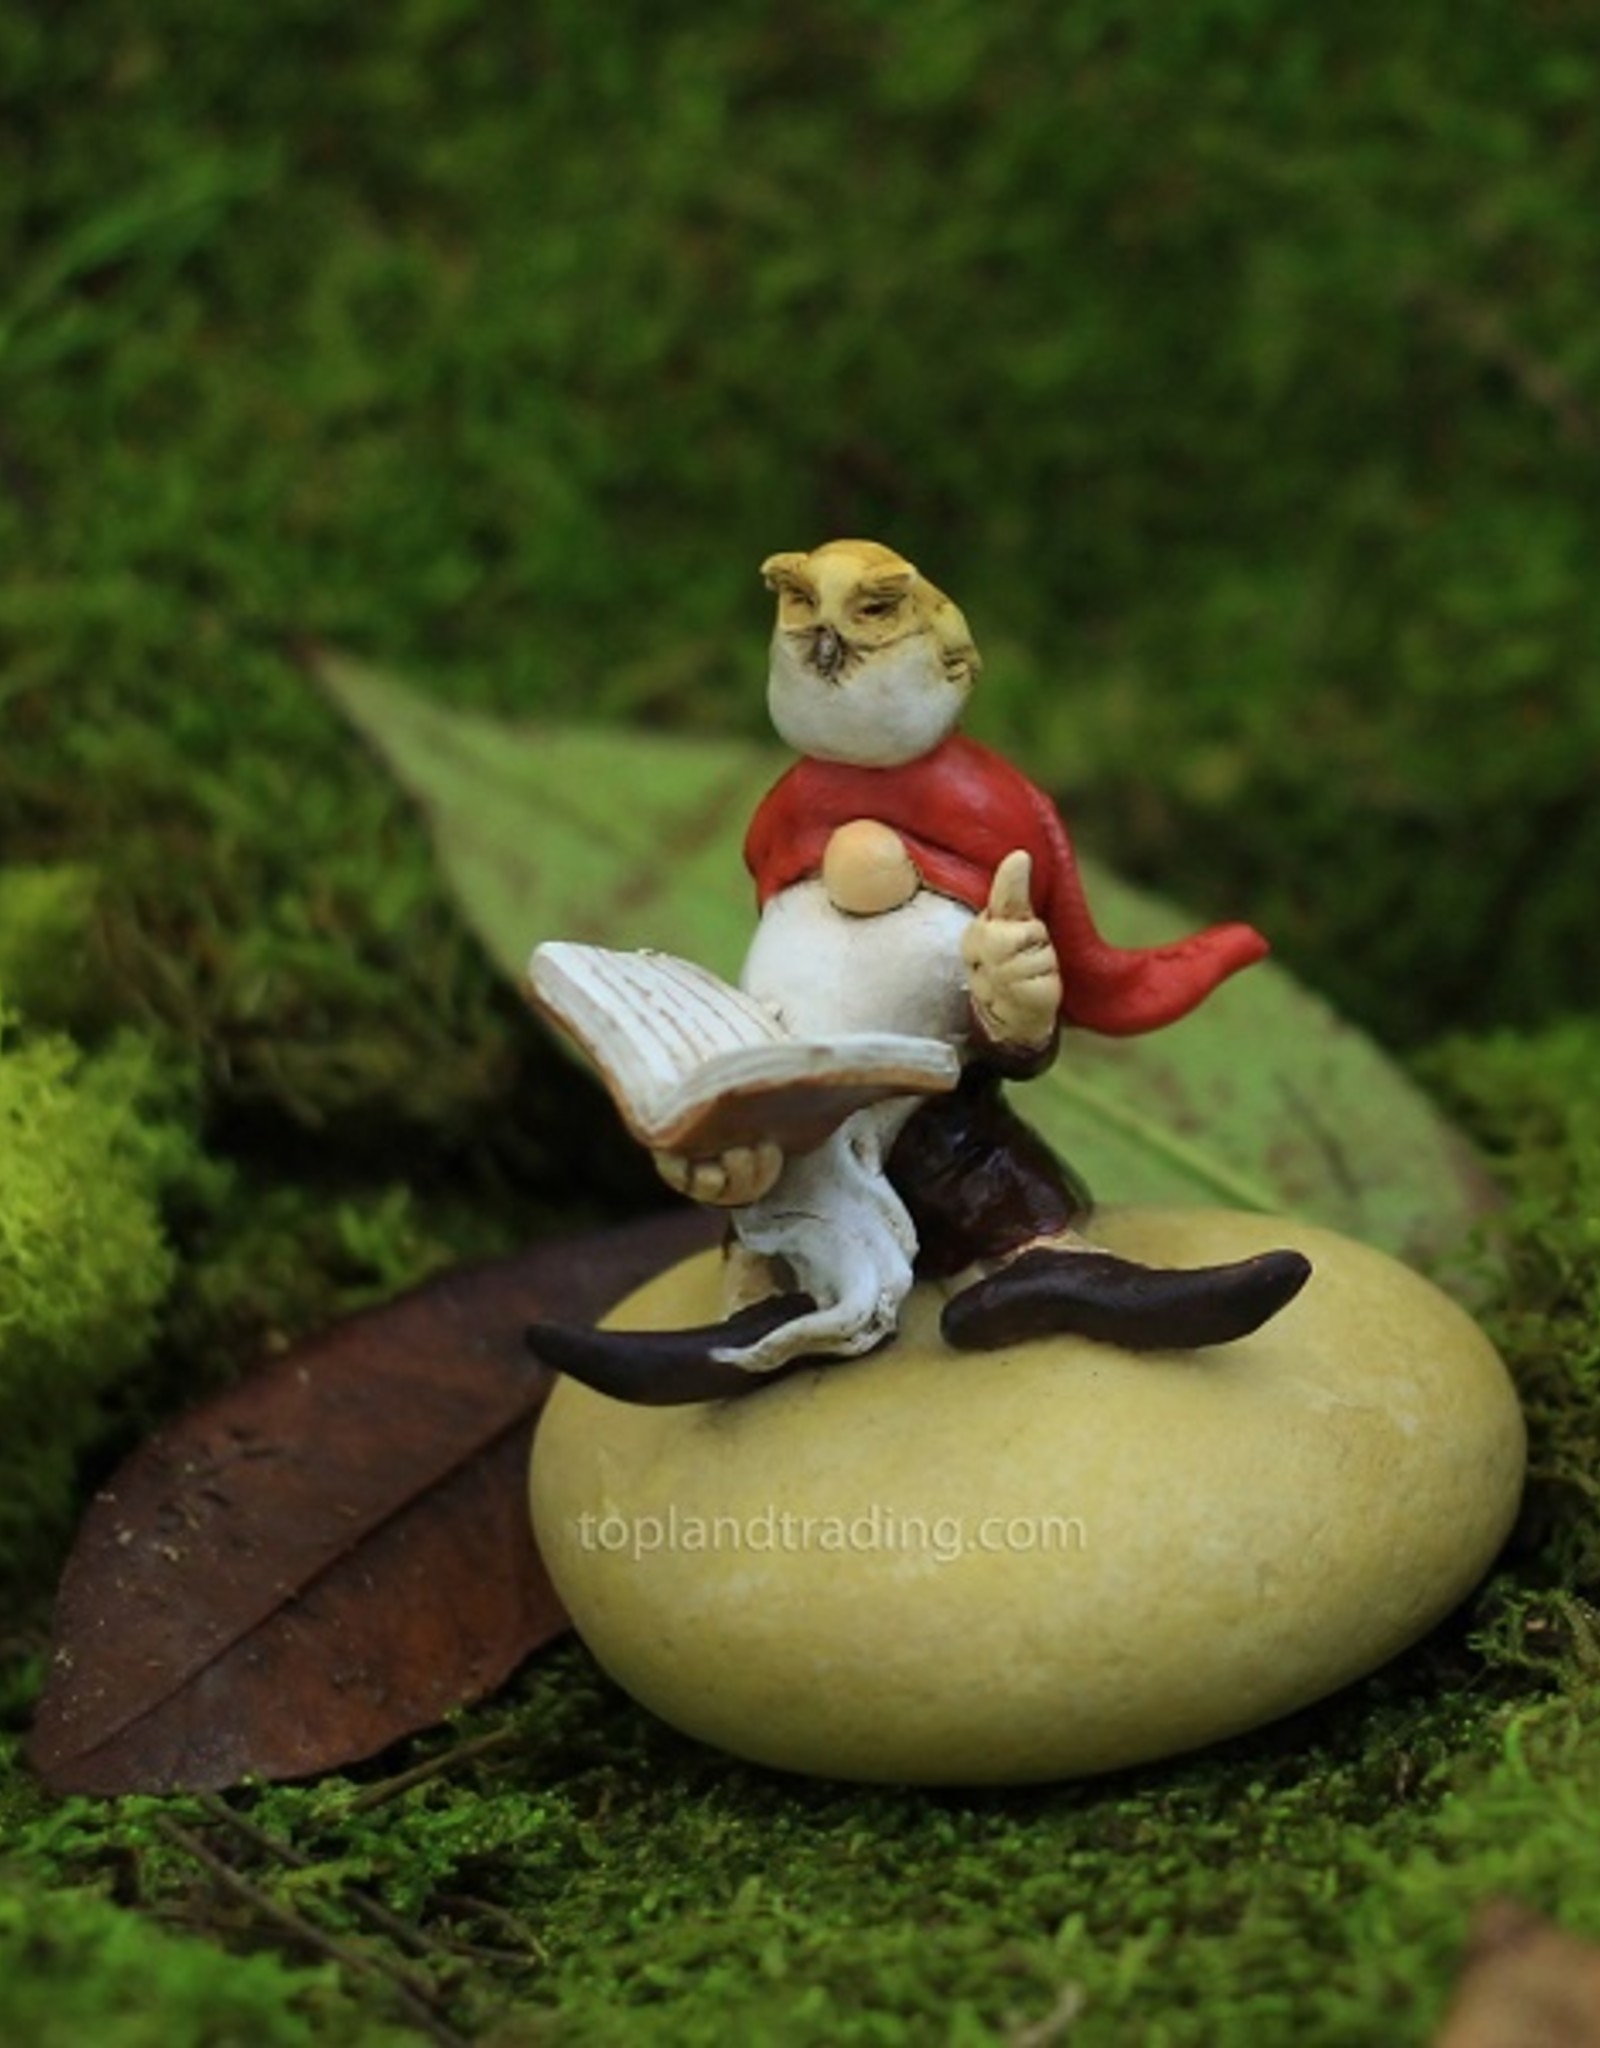 Top Land Trading GARDEN GNOME AND OWL READING BOOK